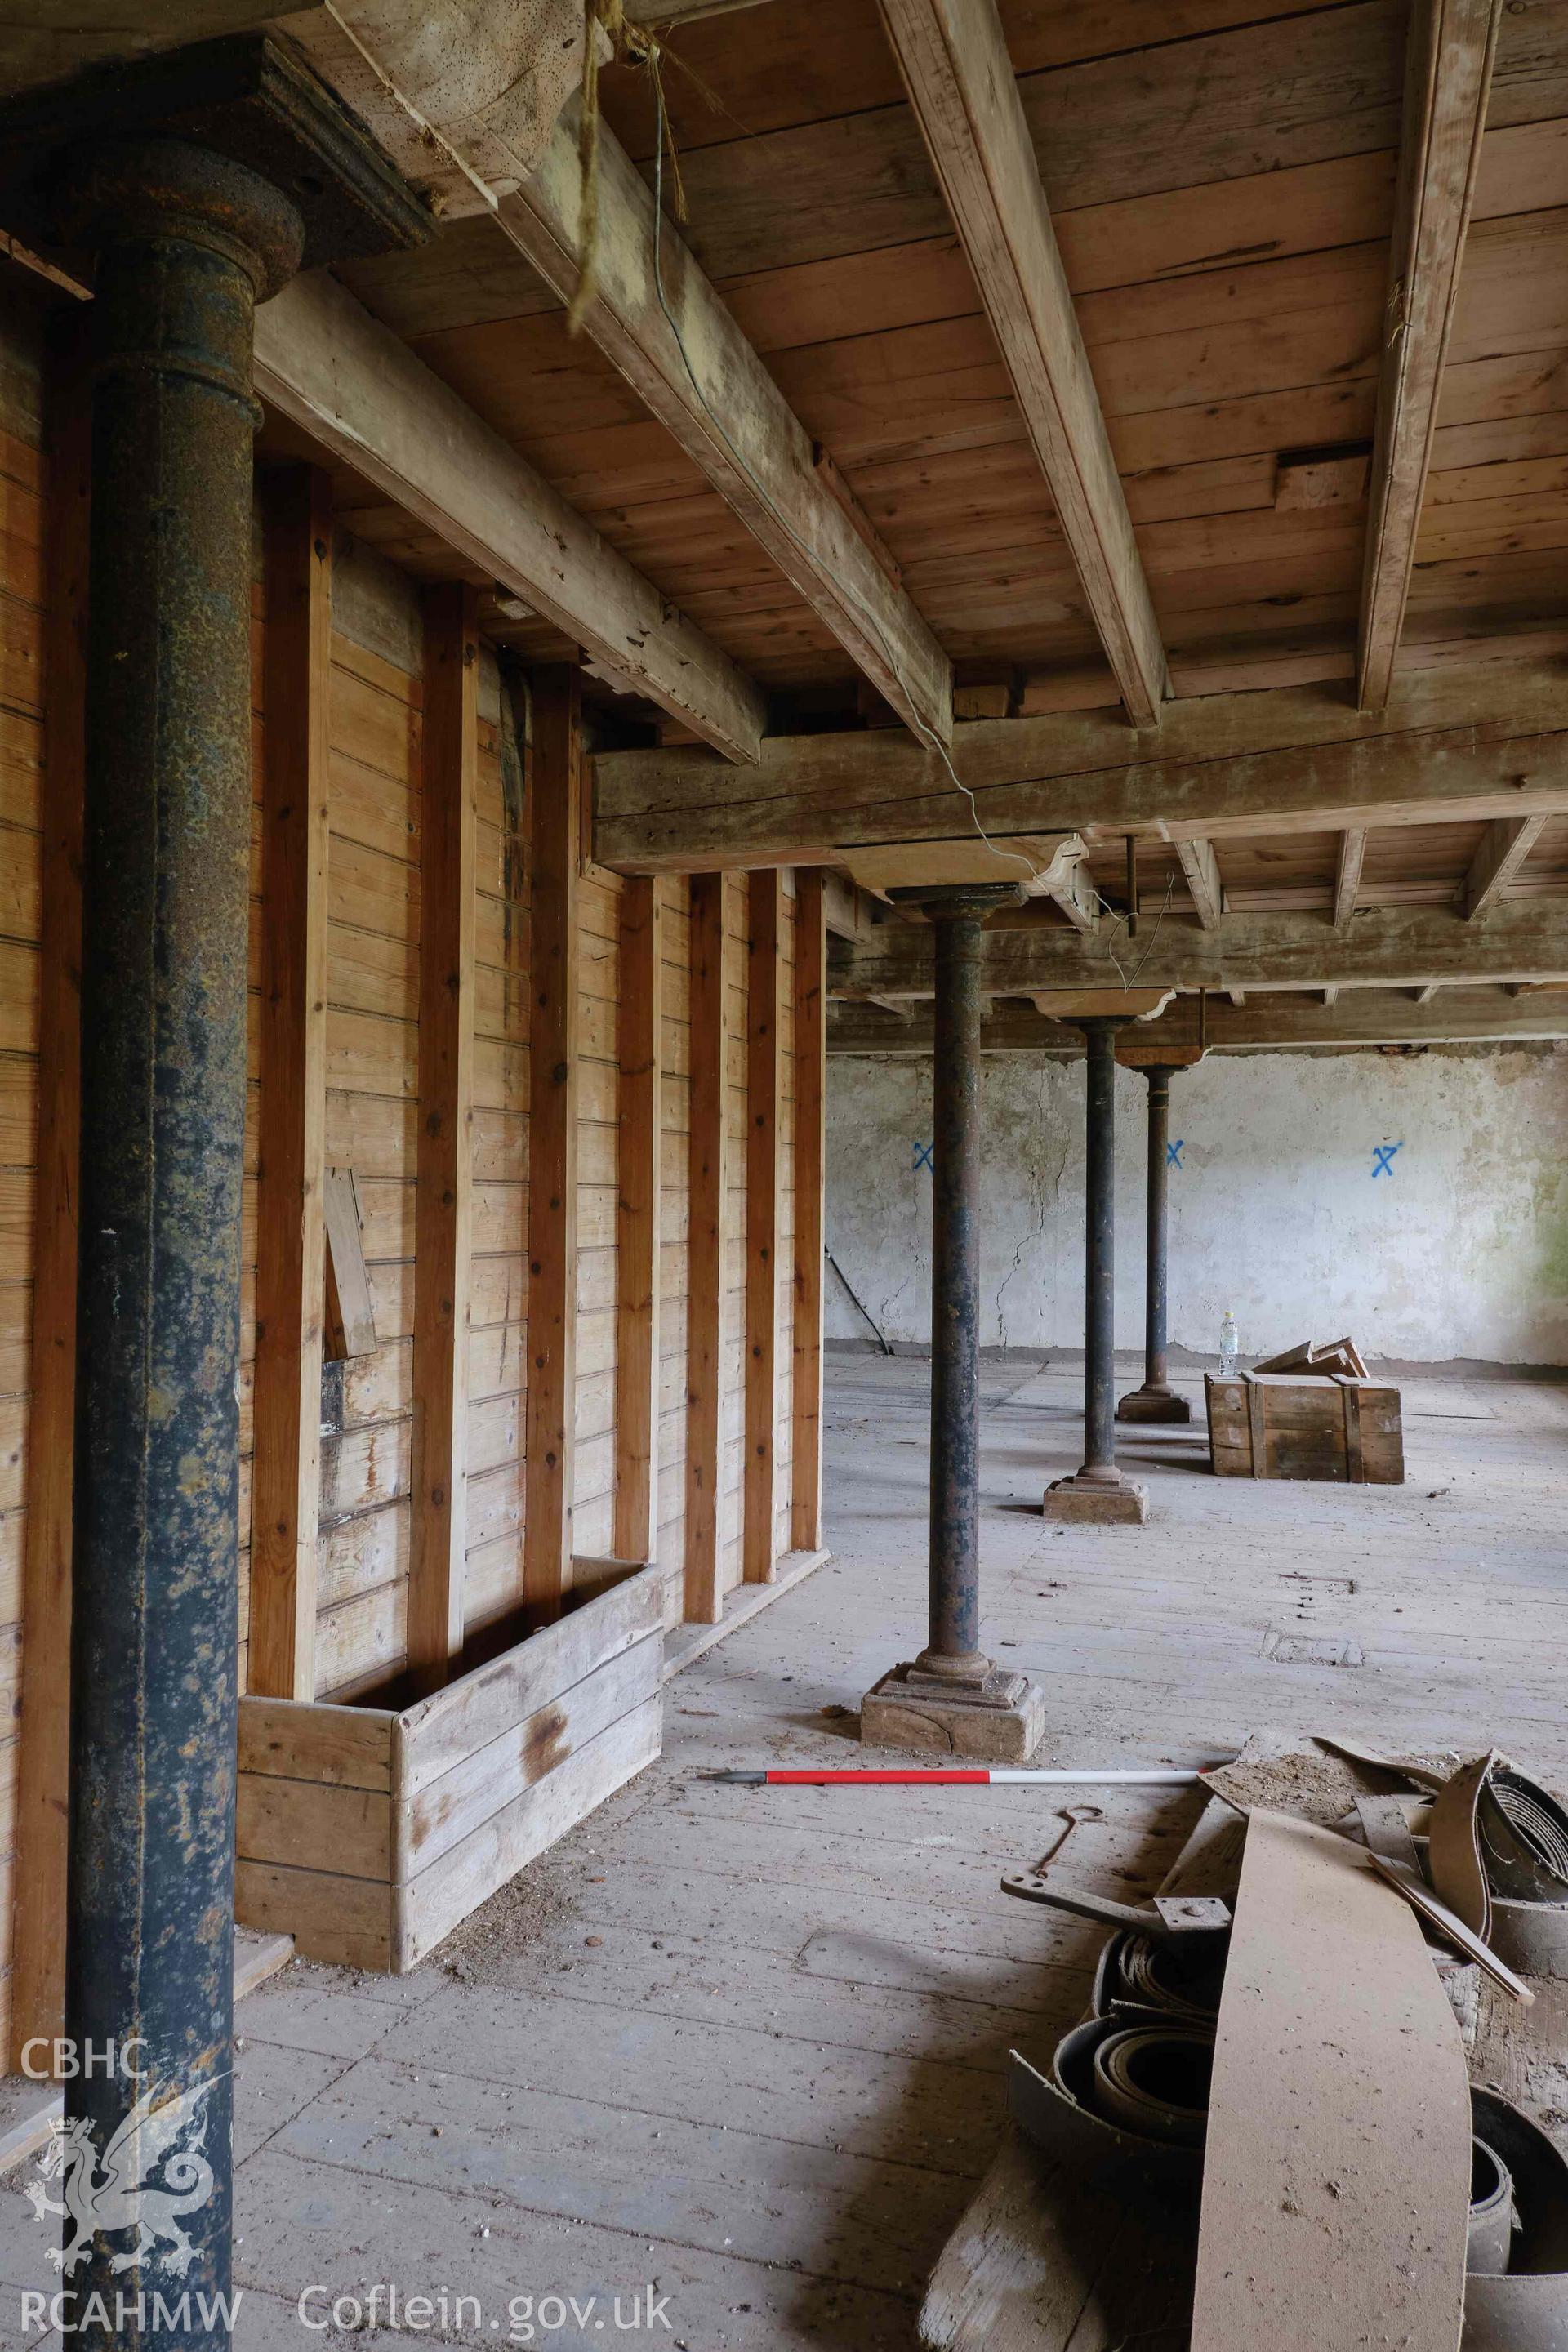 Colour photograph showing Blackpool Mill - 2nd floor, looking SE, with cast iron posts. Produced as part of Historic Building Recording for Blackpool Mill, carried out by Richard Hayman, June 2021.